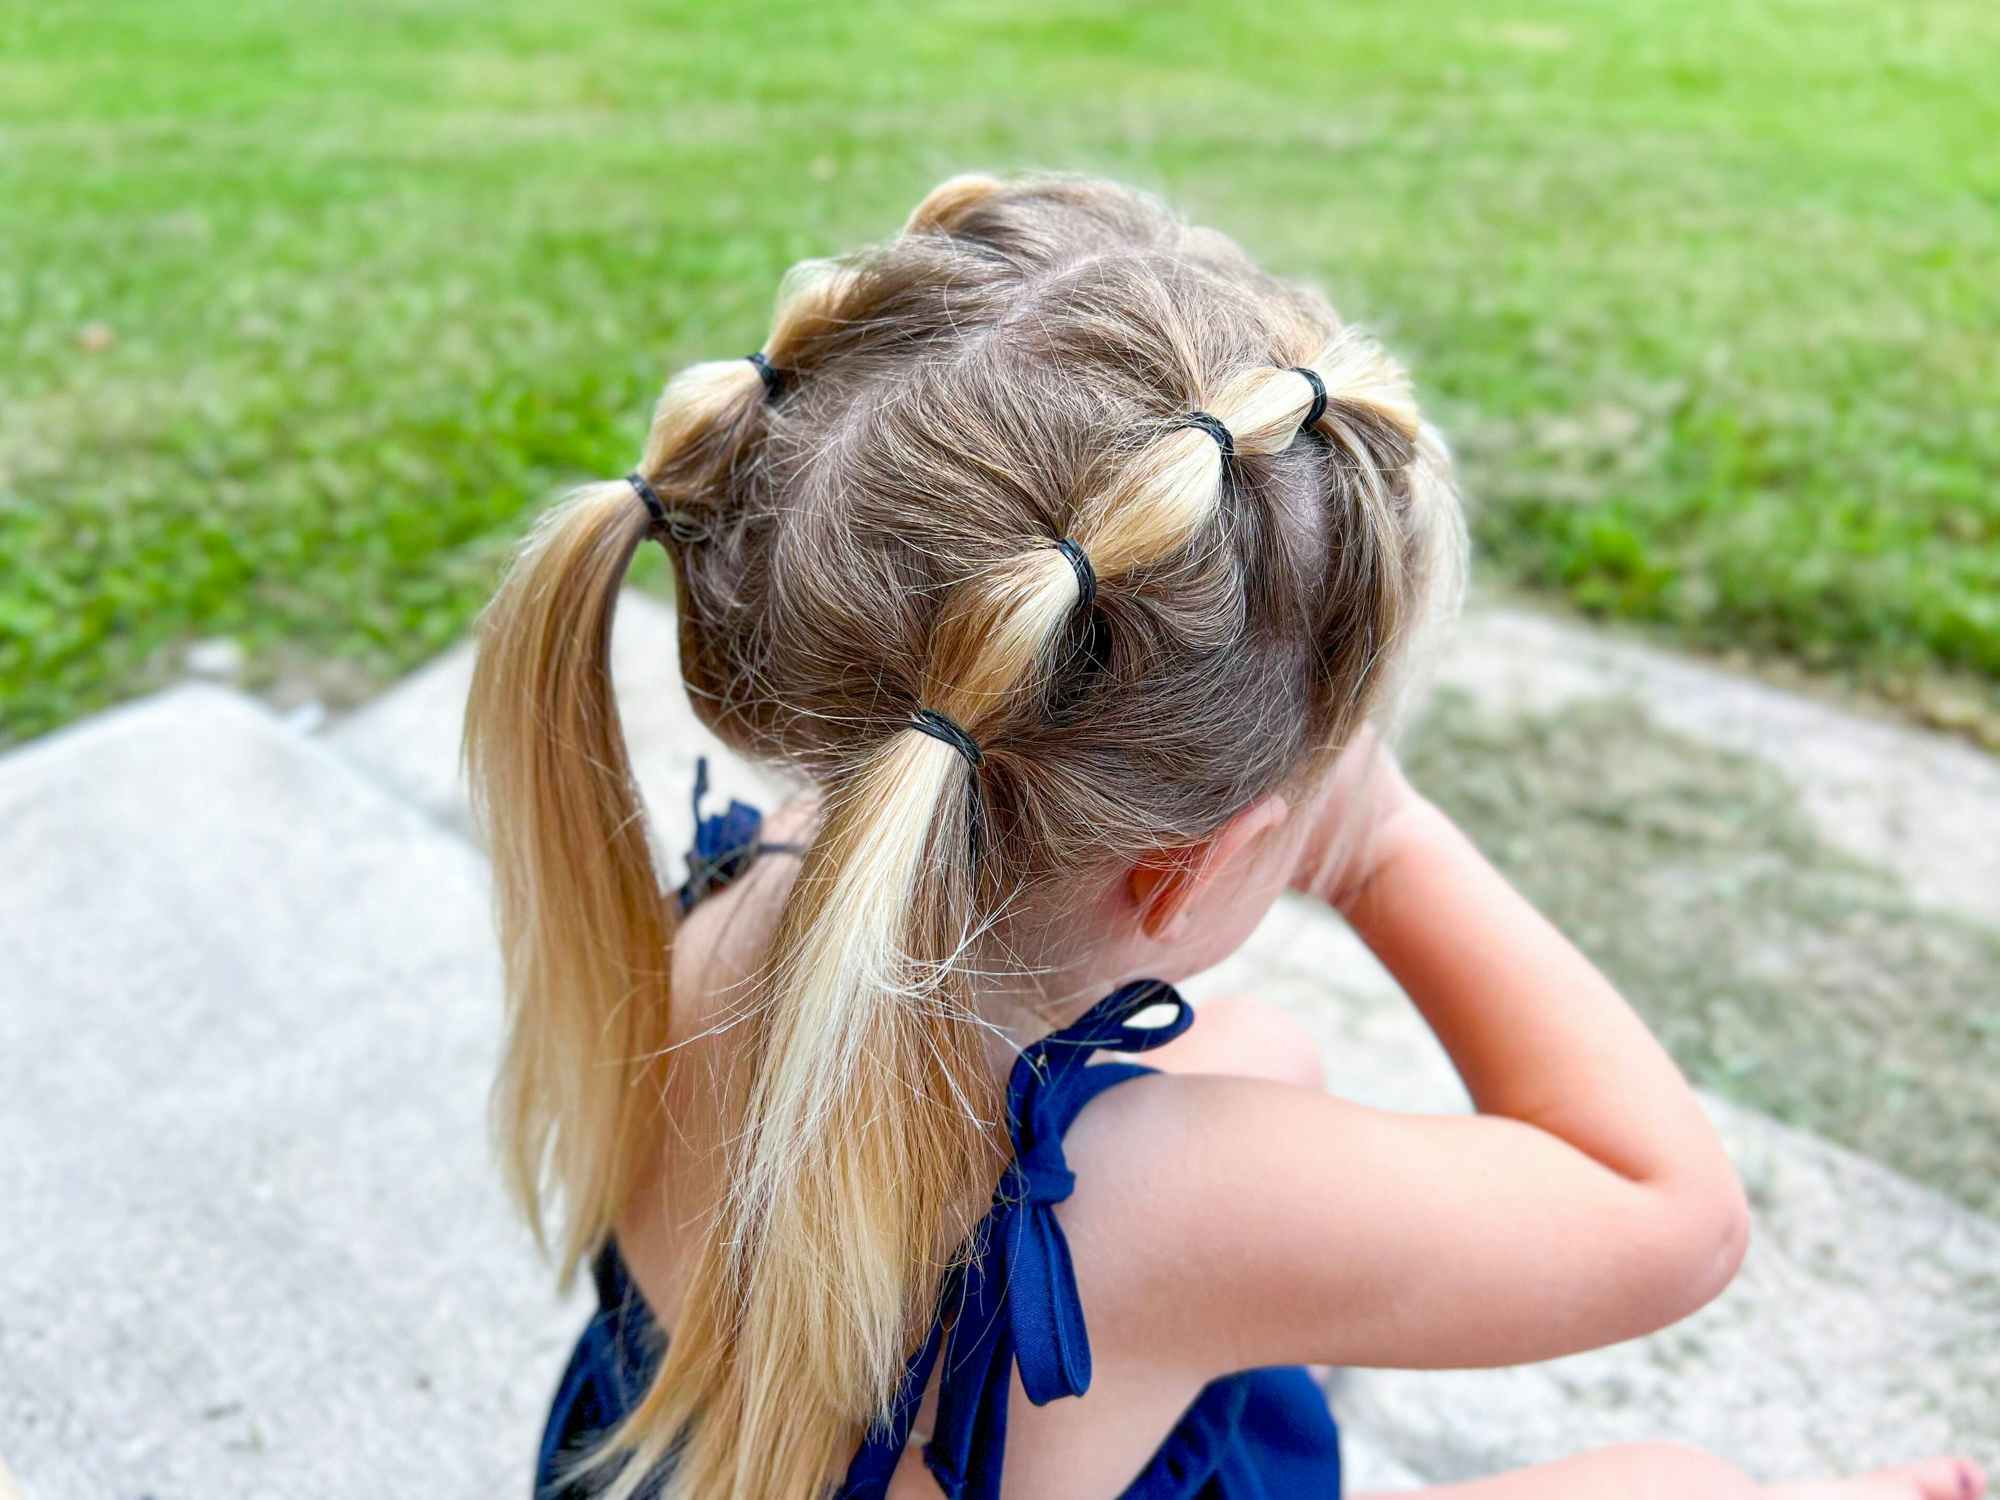 A little girl standing outside, showing off her hairstyle - looped pigtails